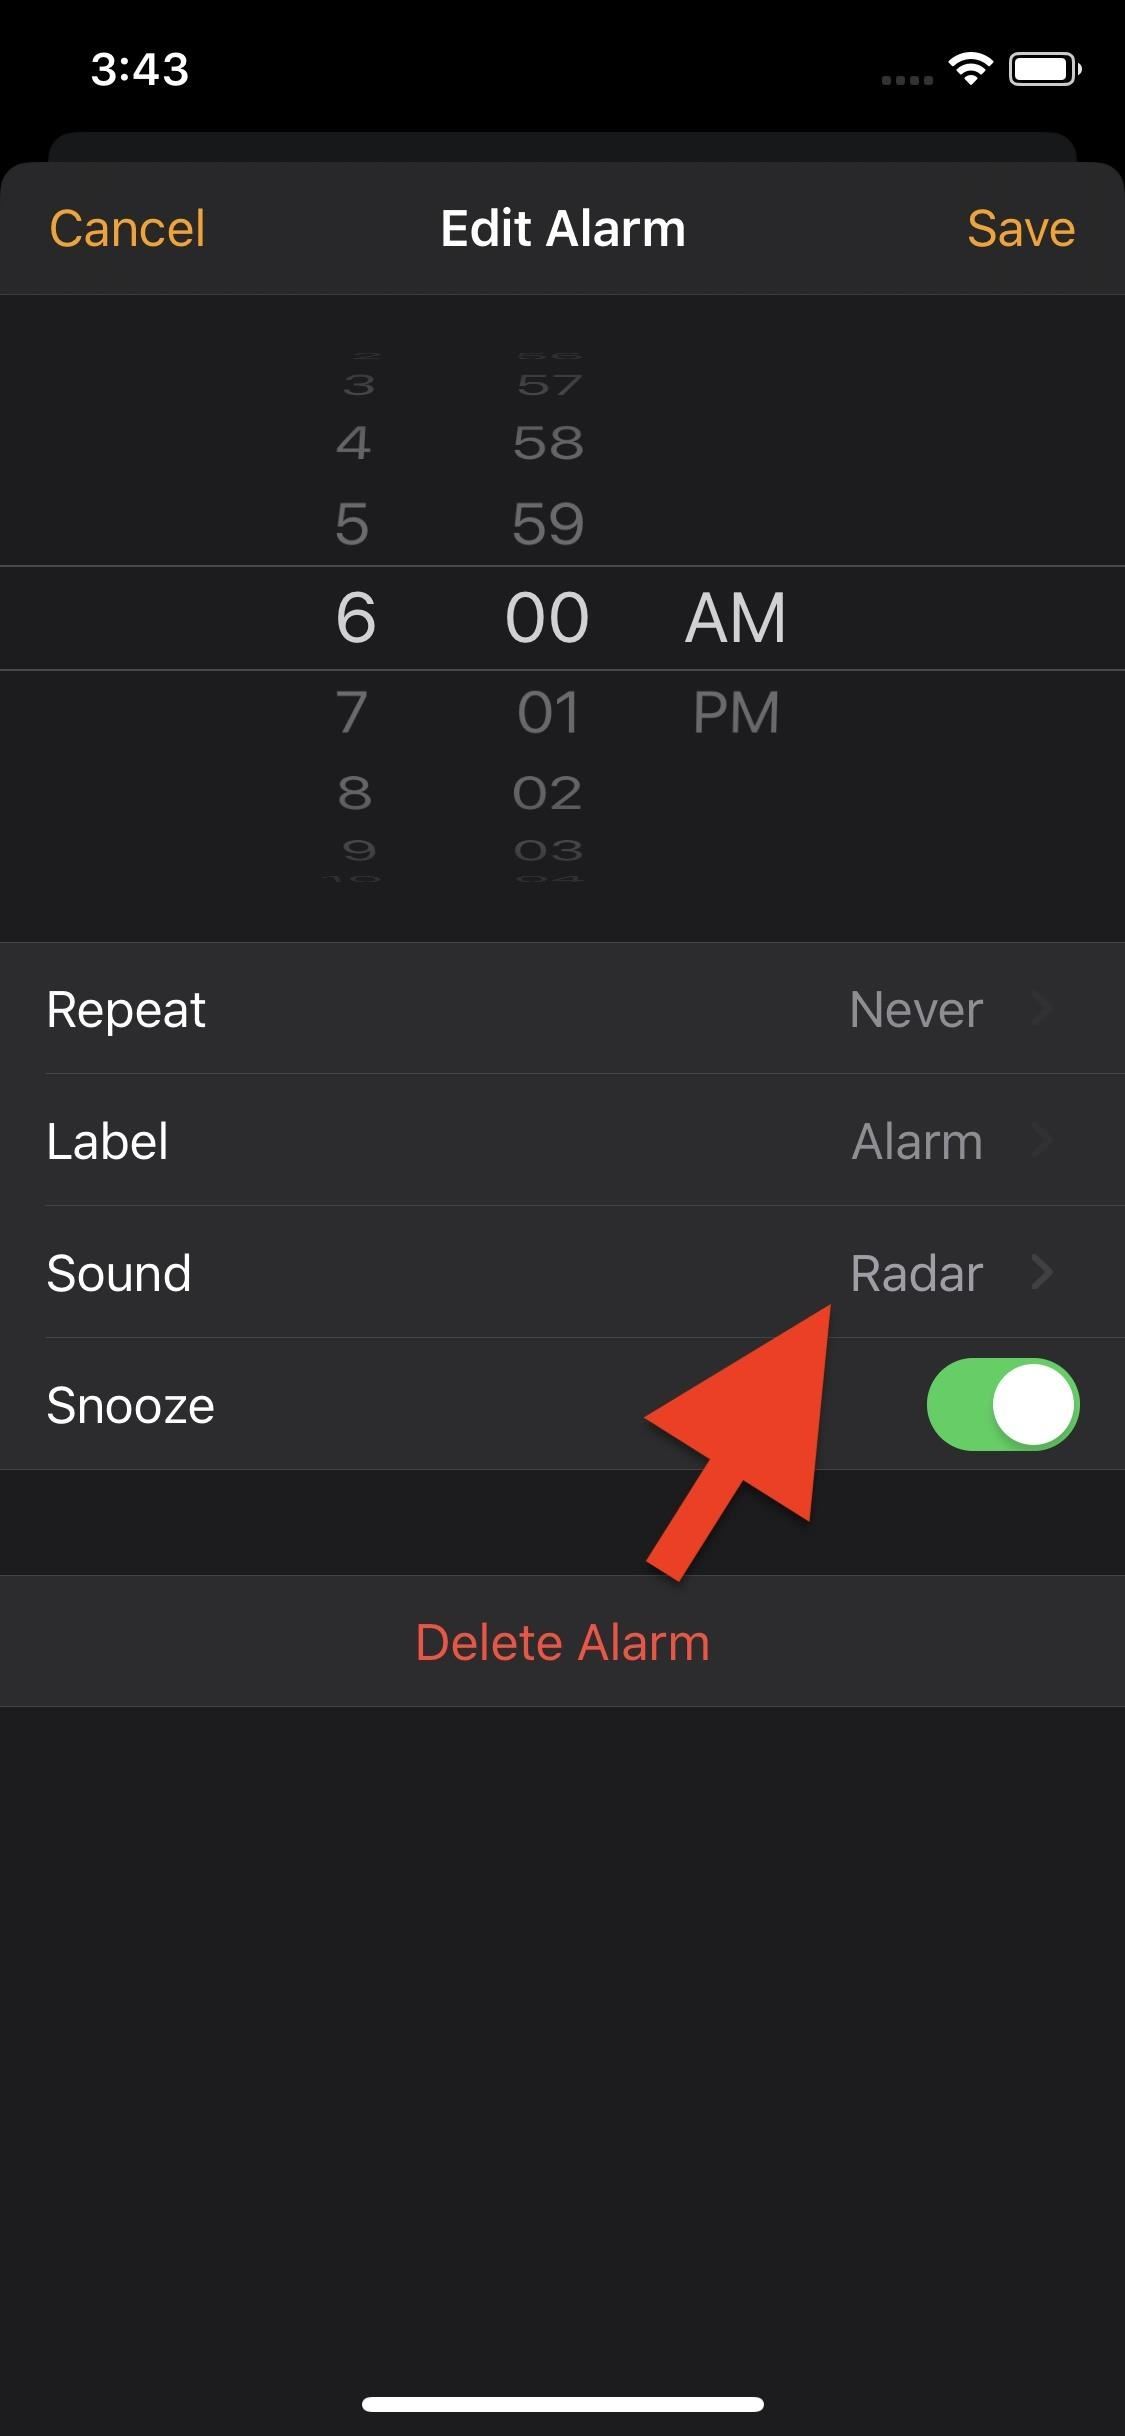 How to Set Apple Music Songs as Alarm Sounds on Your iPhone So You Don't Hit Snooze Anymore